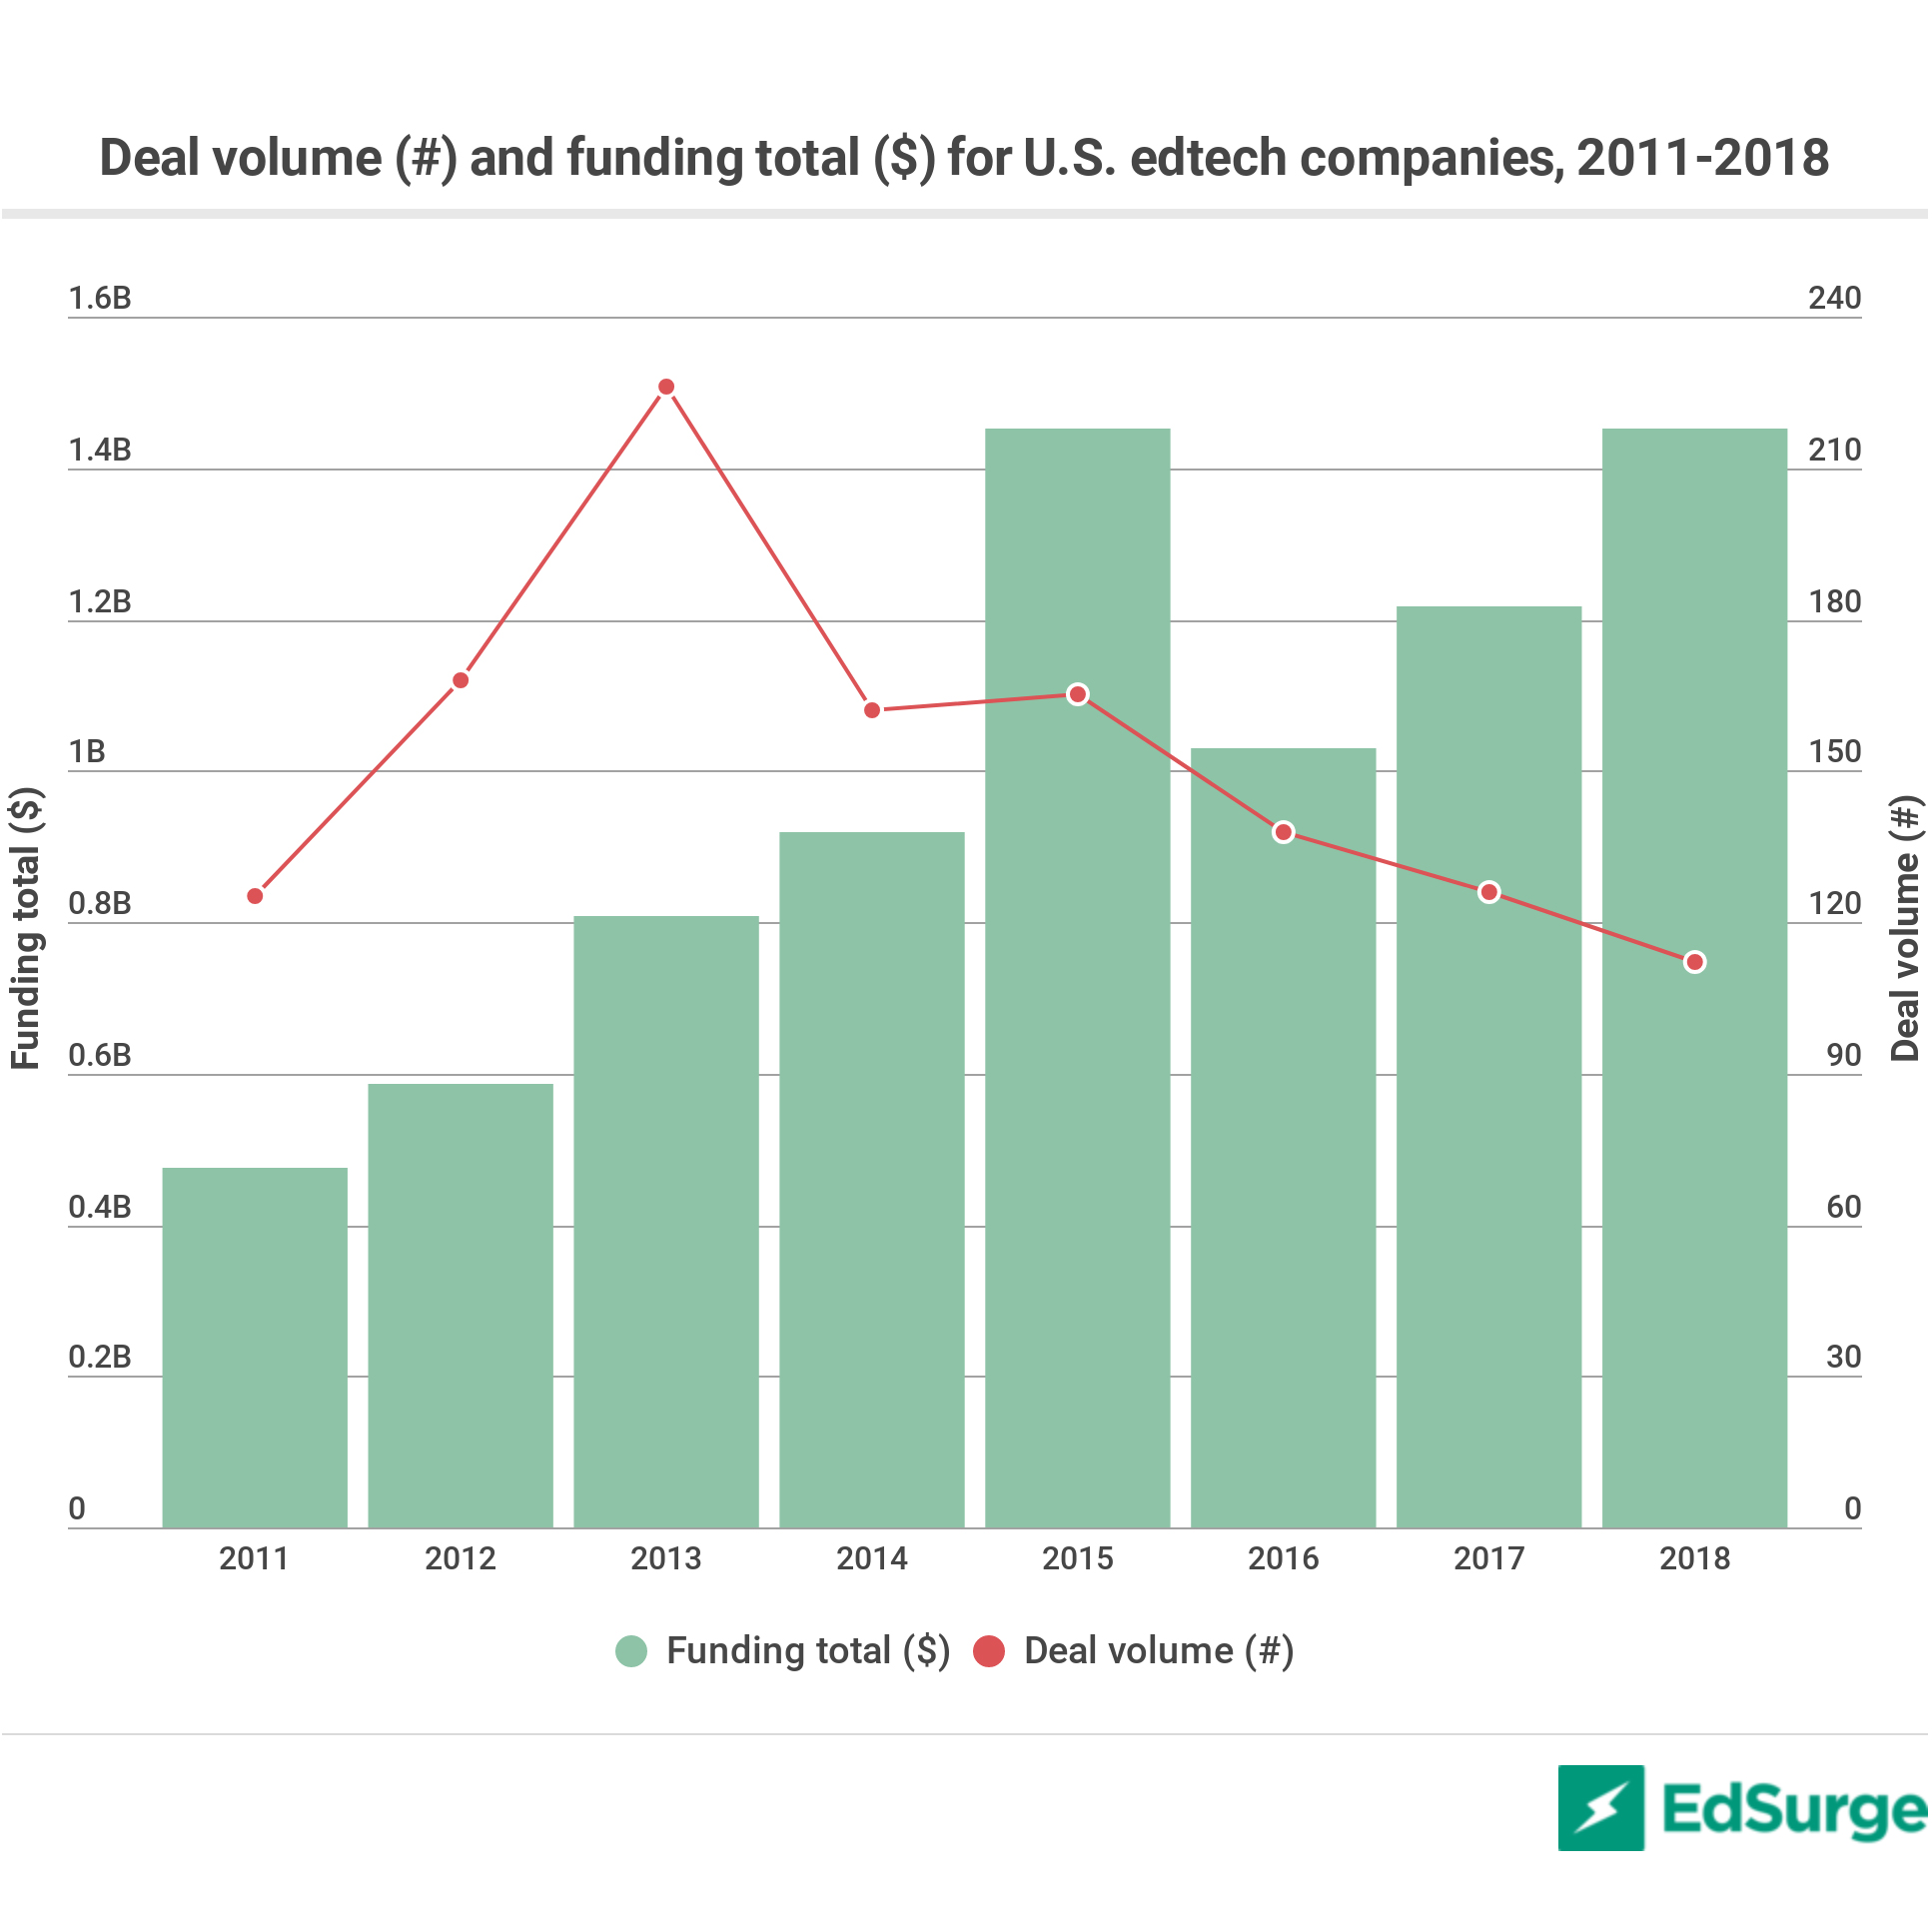 Deal Volume and Funding total for US edtech companies